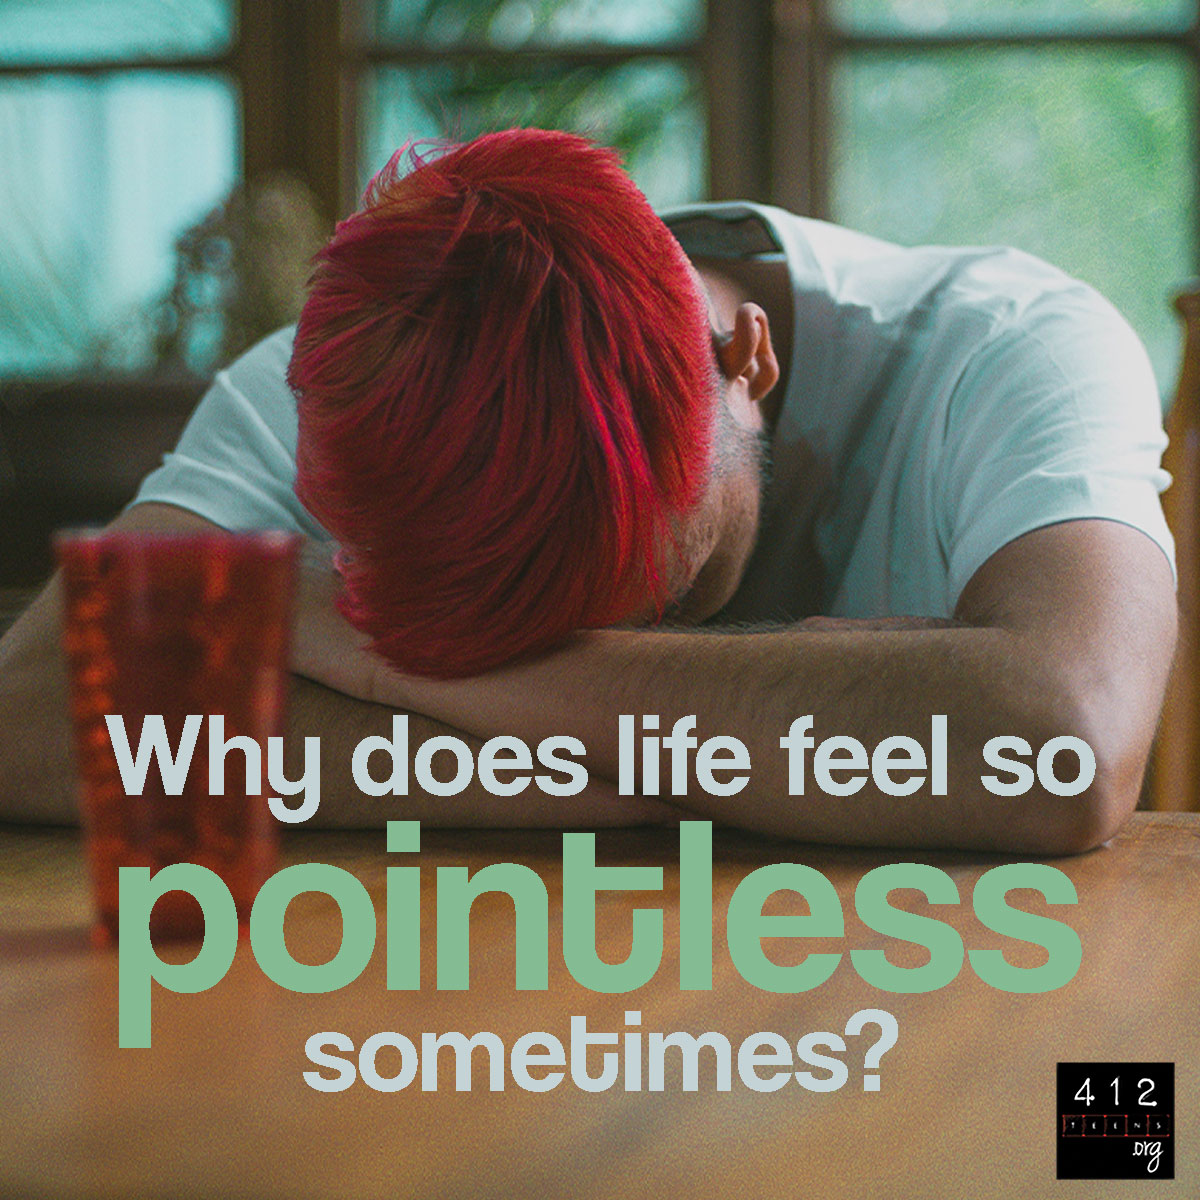 life is pointless suffering